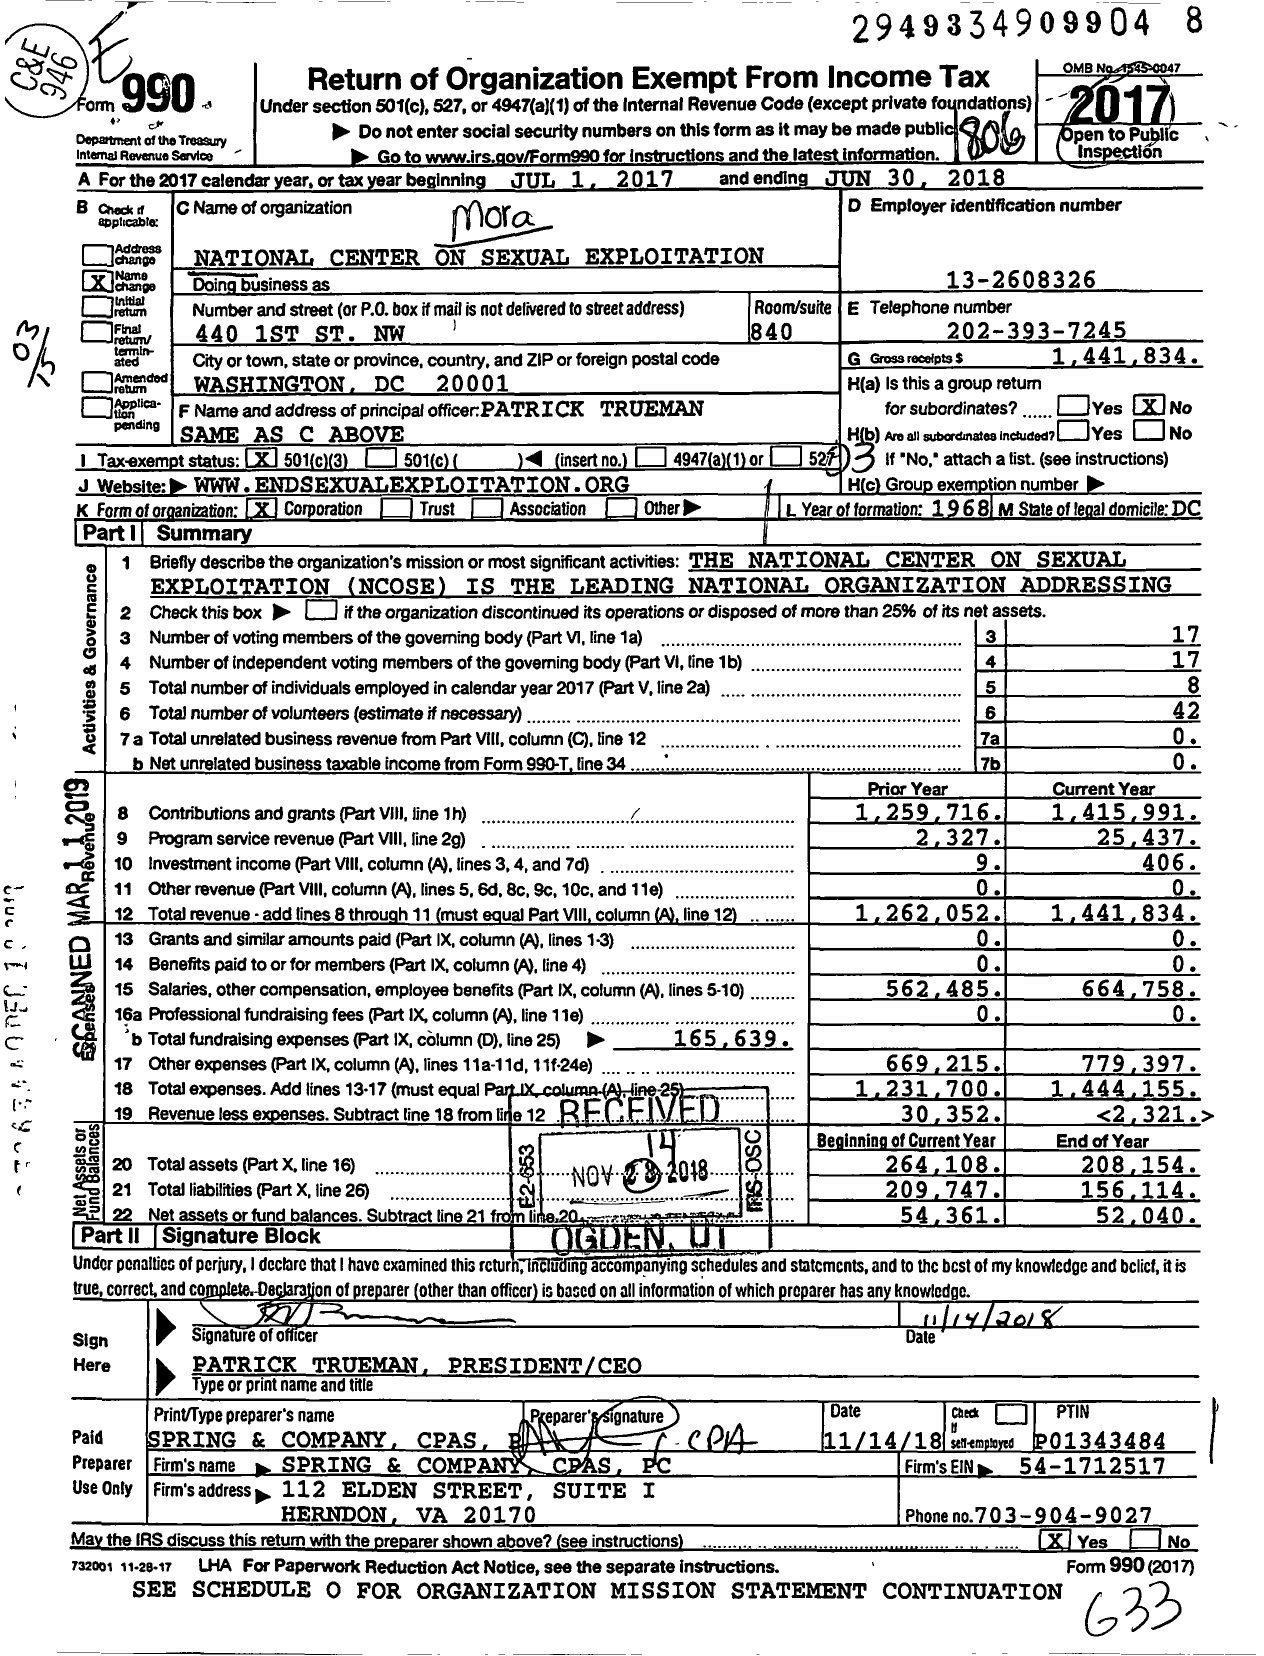 Image of first page of 2017 Form 990 for National Center on Sexual Exploitation